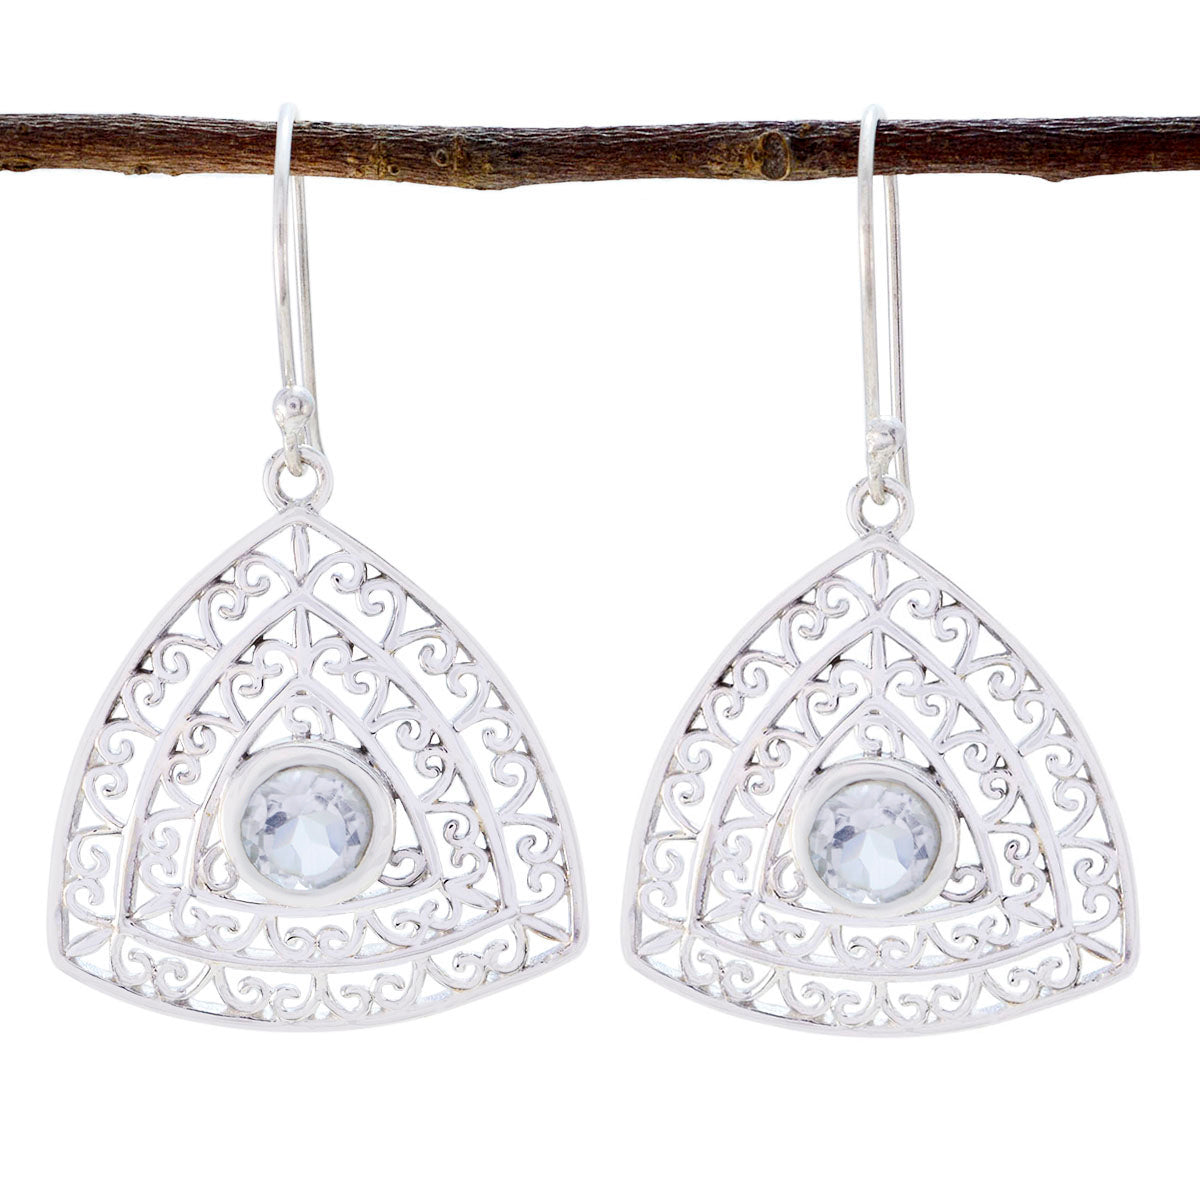 Riyo Genuine Gems round Faceted White Crystal Quartz Silver Earrings new years day gift